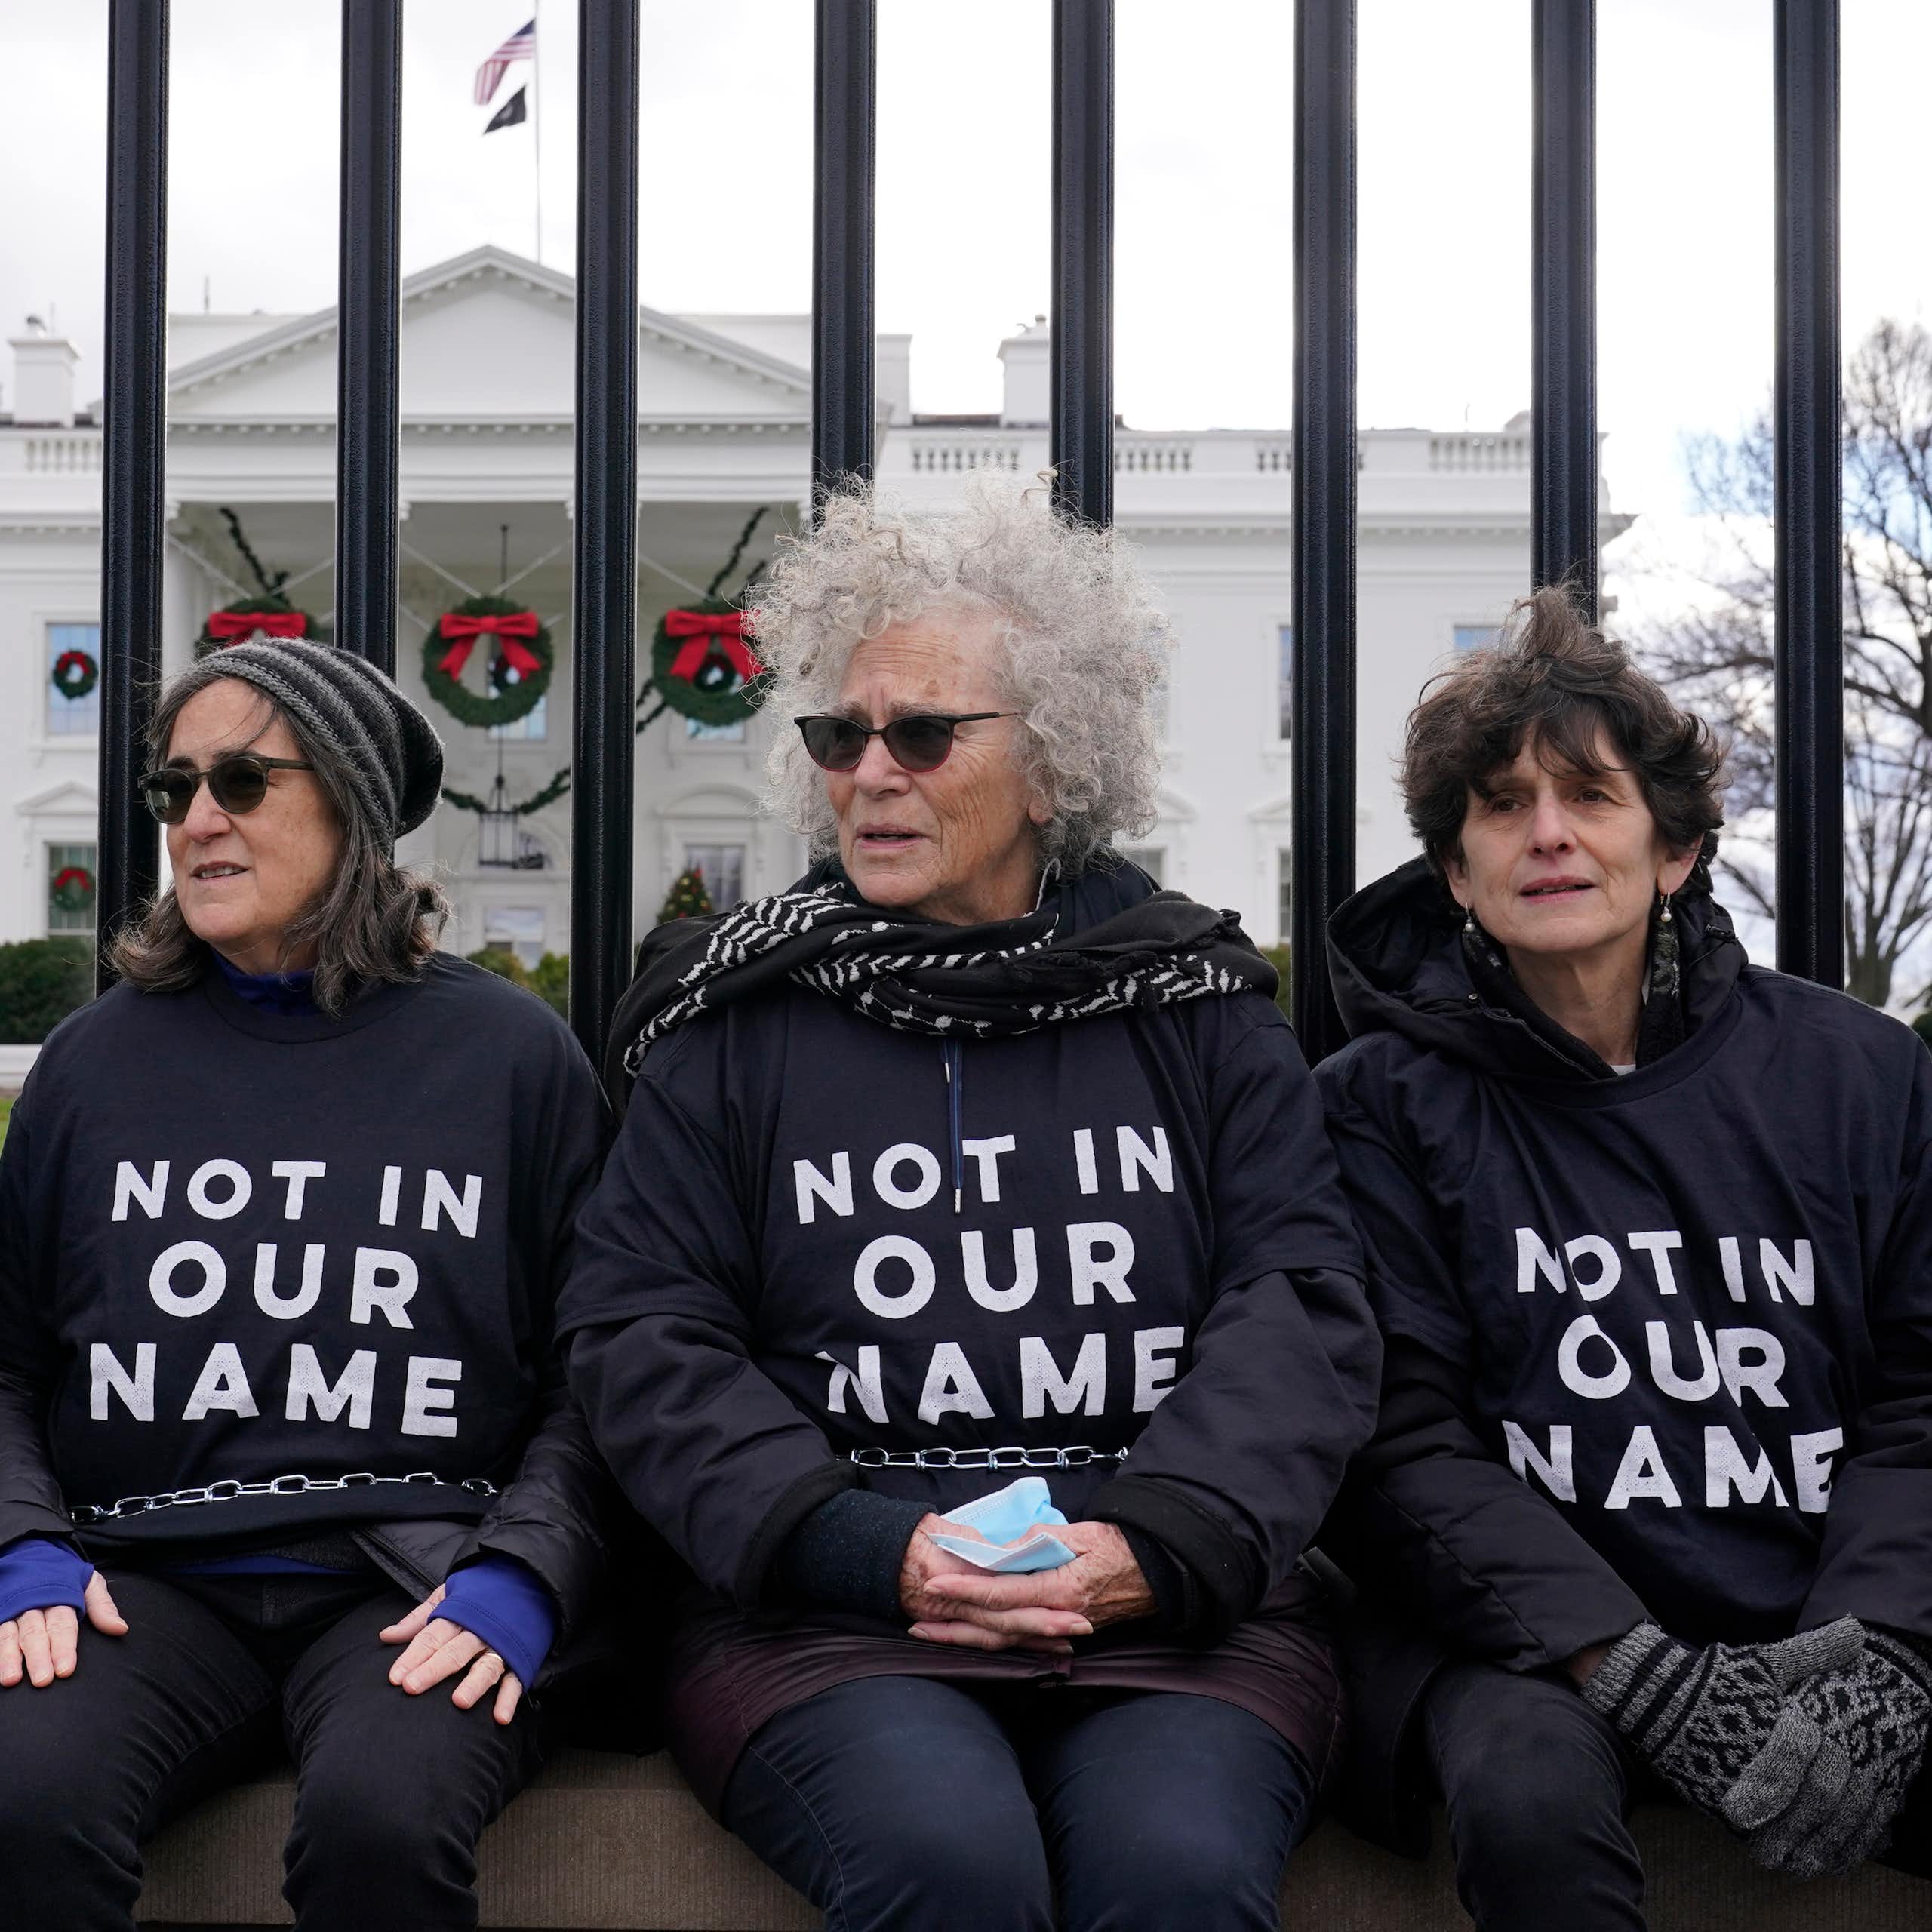 Four women in shirts that say 'Not in our name' sit on a fence with a large white mansion behind them.